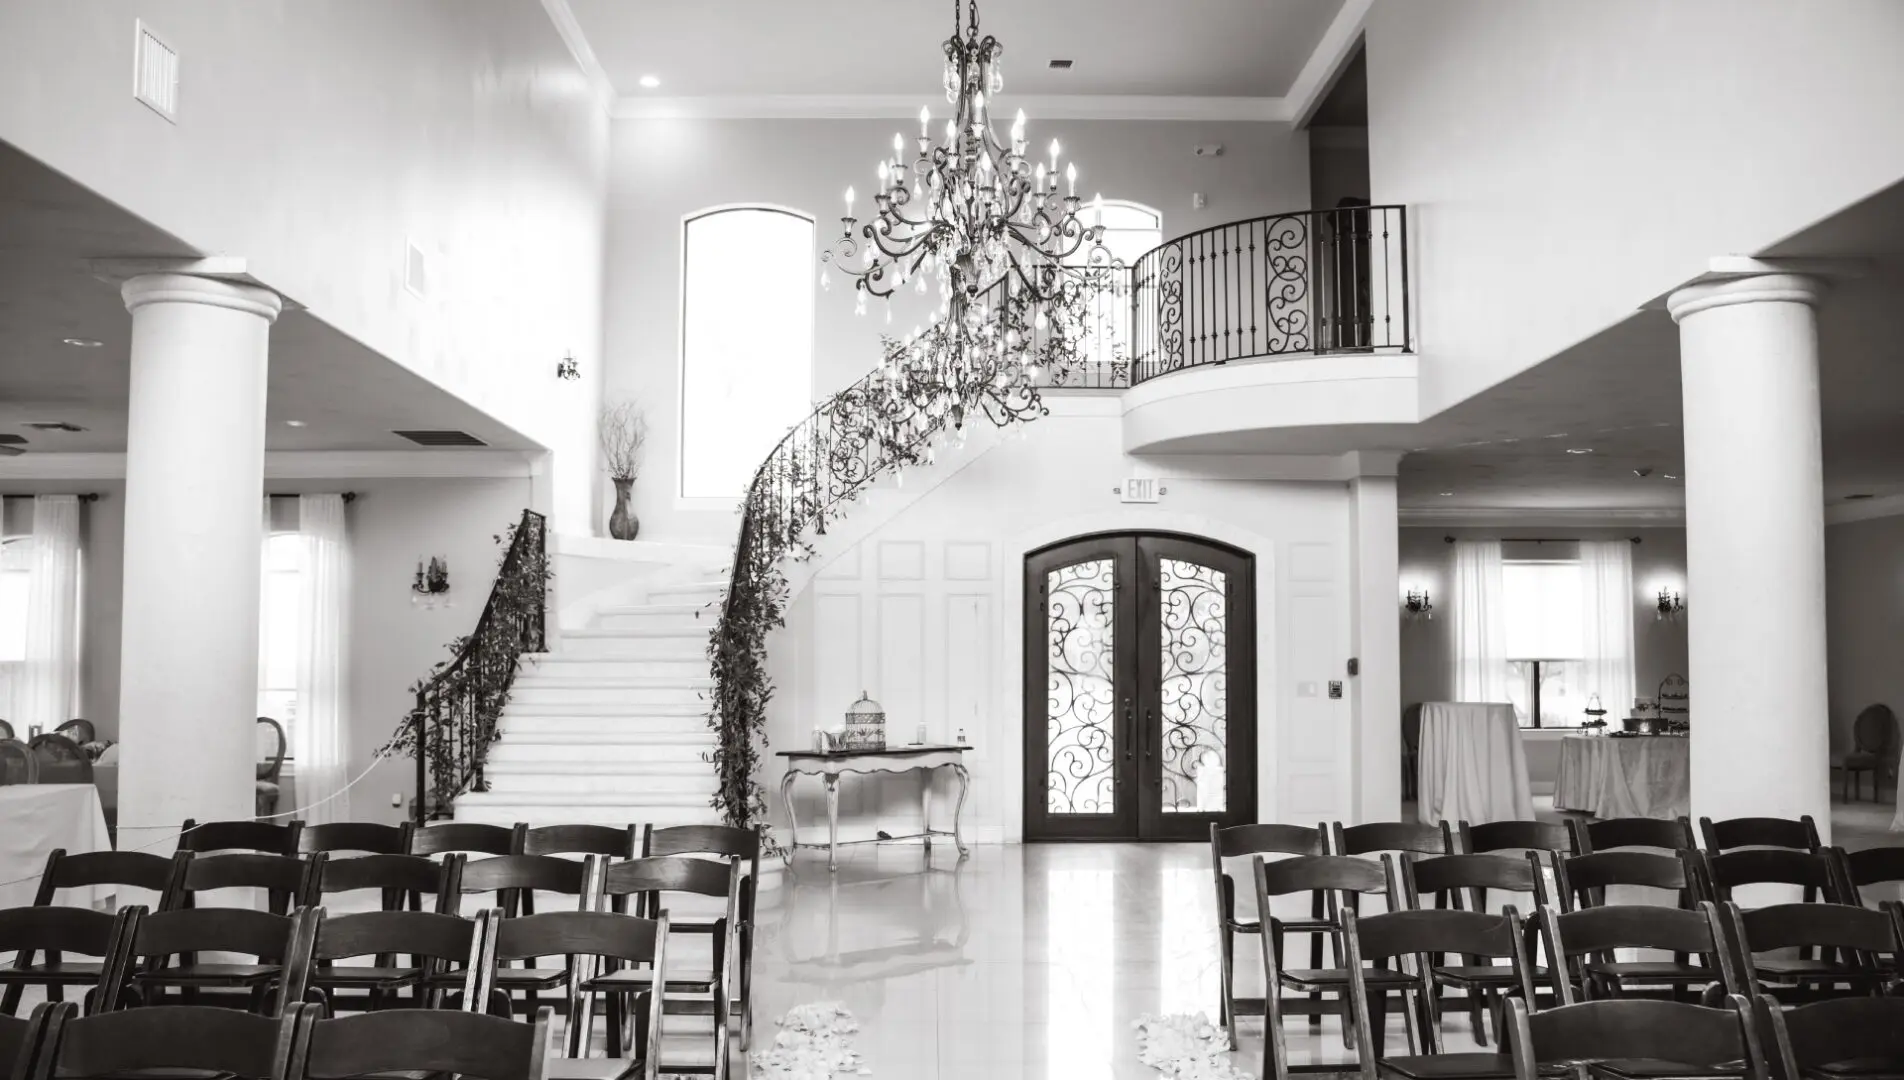 A large room with two sets of chairs and a chandelier.